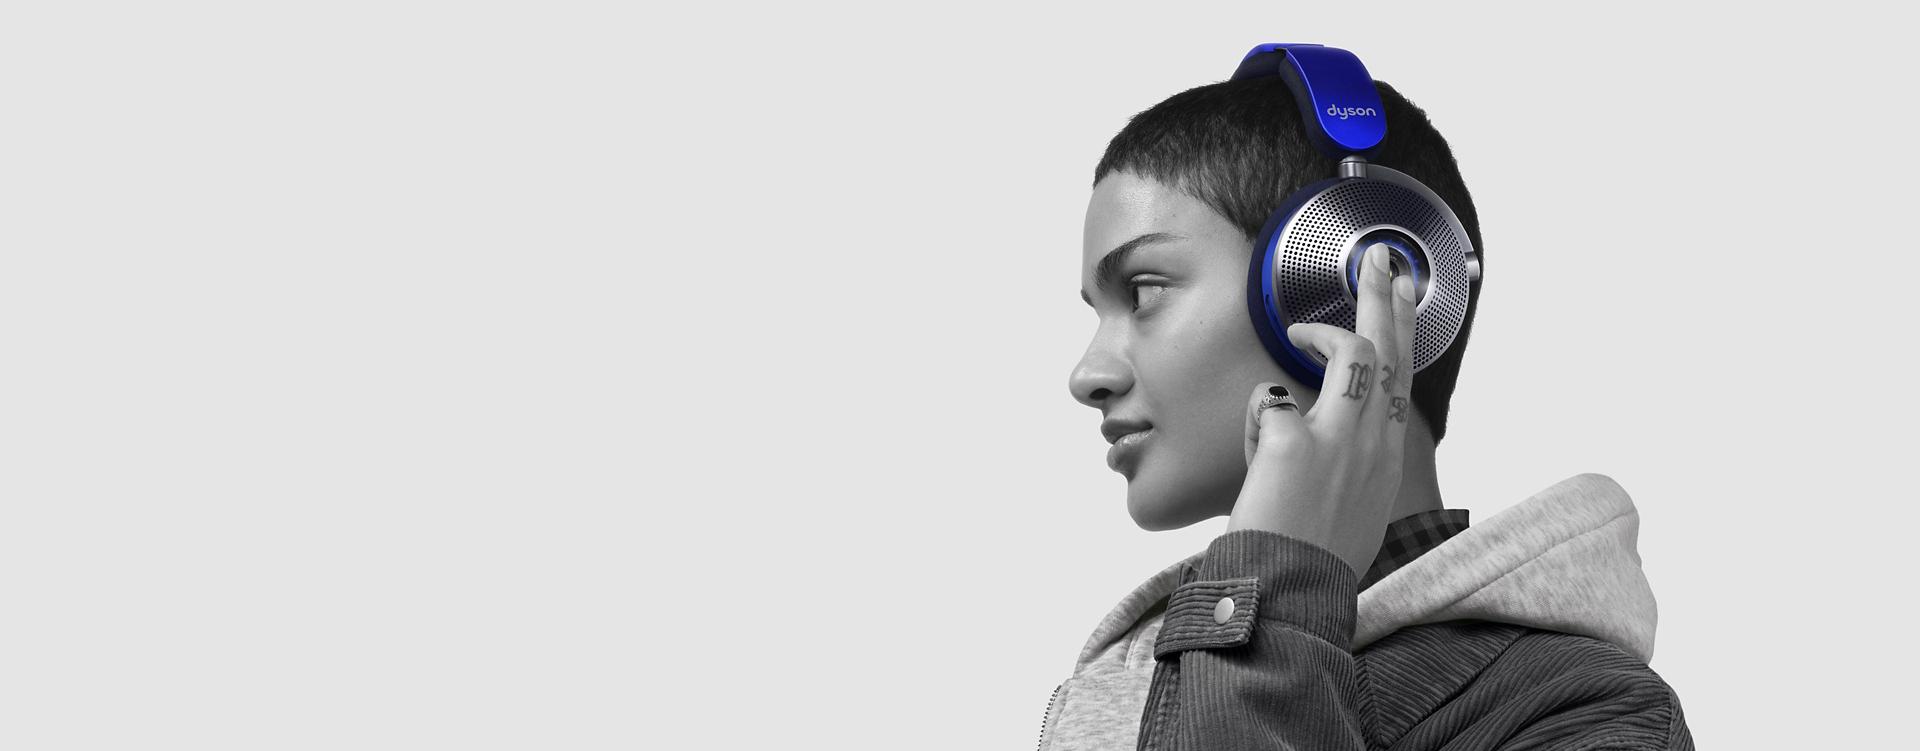 Woman wearing Dyson zone noise-cancelling headphones as she touches the ear cup.